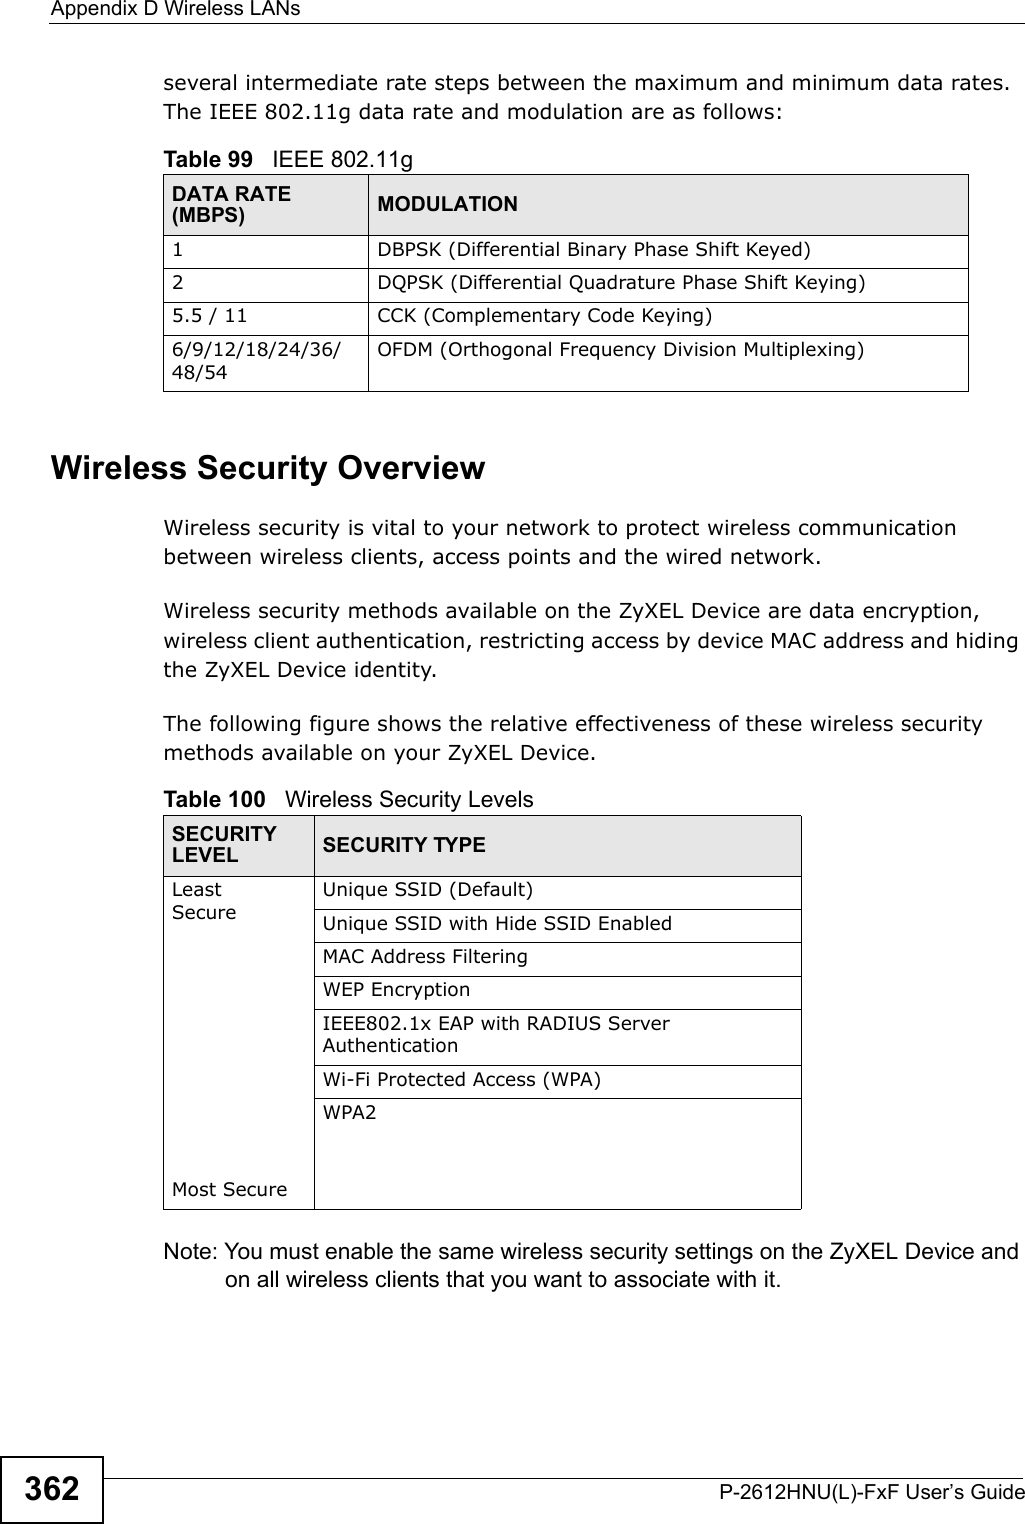 Appendix D Wireless LANsP-2612HNU(L)-FxF User’s Guide362several intermediate rate steps between the maximum and minimum data rates.The IEEE 802.11g data rate and modulation are as follows:Wireless Security OverviewWireless security is vital to your network to protect wireless communication between wireless clients, access points and the wired network.Wireless security methods available on the ZyXEL Device are data encryption, wireless client authentication, restricting access by device MAC address and hiding the ZyXEL Device identity.The following figure shows the relative effectiveness of these wireless securitymethods available on your ZyXEL Device.Note: You must enable the same wireless security settings on the ZyXEL Device andon all wireless clients that you want to associate with it. Table 99   IEEE 802.11gDATA RATE (MBPS) MODULATION1 DBPSK (Differential Binary Phase Shift Keyed)2 DQPSK (Differential Quadrature Phase Shift Keying)5.5 / 11 CCK (Complementary Code Keying) 6/9/12/18/24/36/48/54OFDM (Orthogonal Frequency Division Multiplexing) Table 100   Wireless Security LevelsSECURITY LEVEL SECURITY TYPELeast       Secure Most SecureUnique SSID (Default)Unique SSID with Hide SSID EnabledMAC Address FilteringWEP EncryptionIEEE802.1x EAP with RADIUS ServerAuthenticationWi-Fi Protected Access (WPA)WPA2